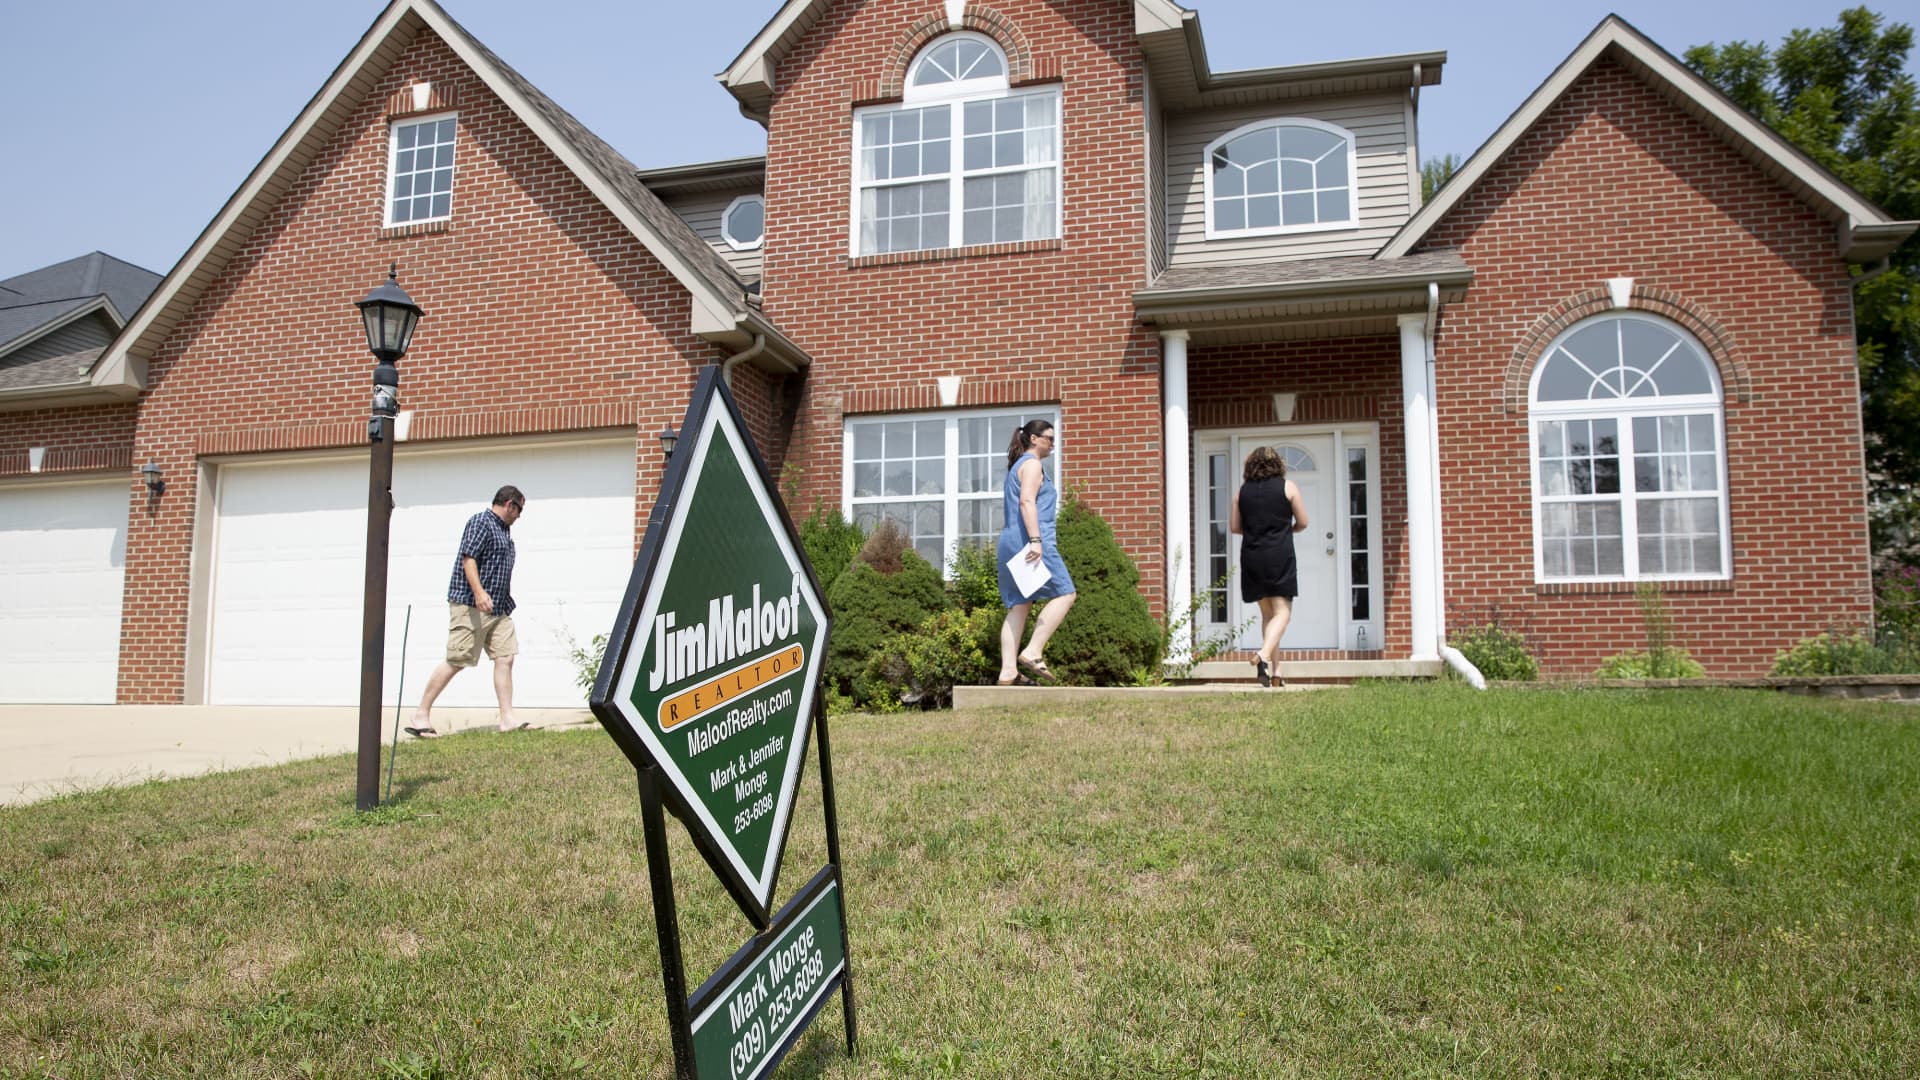 Mortgage demand drops as interest rates remain stubbornly high